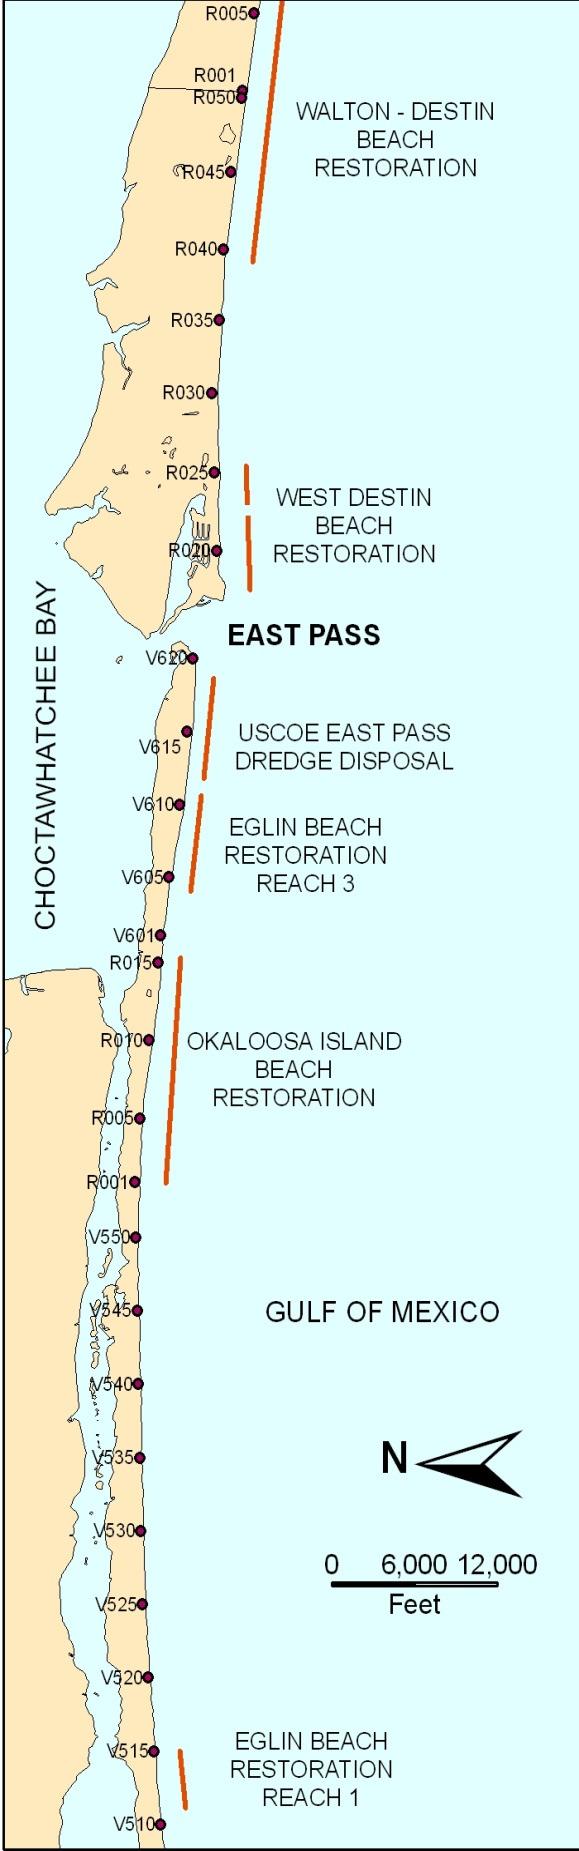 History of East Pass East Pass has historically been the natural tidal connection between the Gulf of Mexico and Choctawhatchee Bay in northwest Florida (Figure 2).